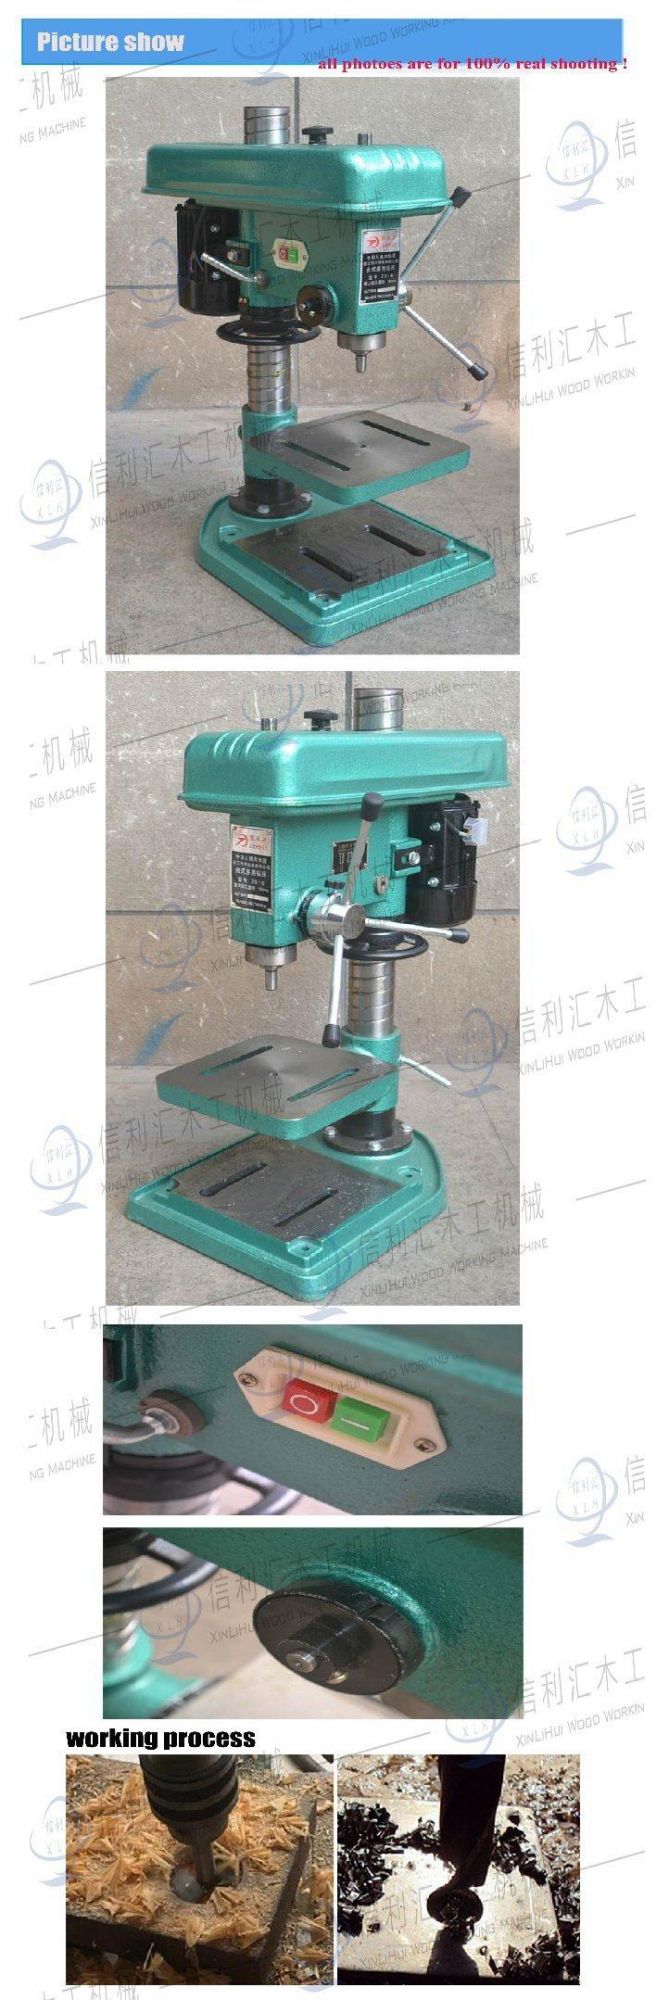 Good, Quality Woodworking Machinery, Press Drill220/240 V- Vertical Press Drill with Copper Coil. Vertical Drilling Machine The Body Made From Cast Iron